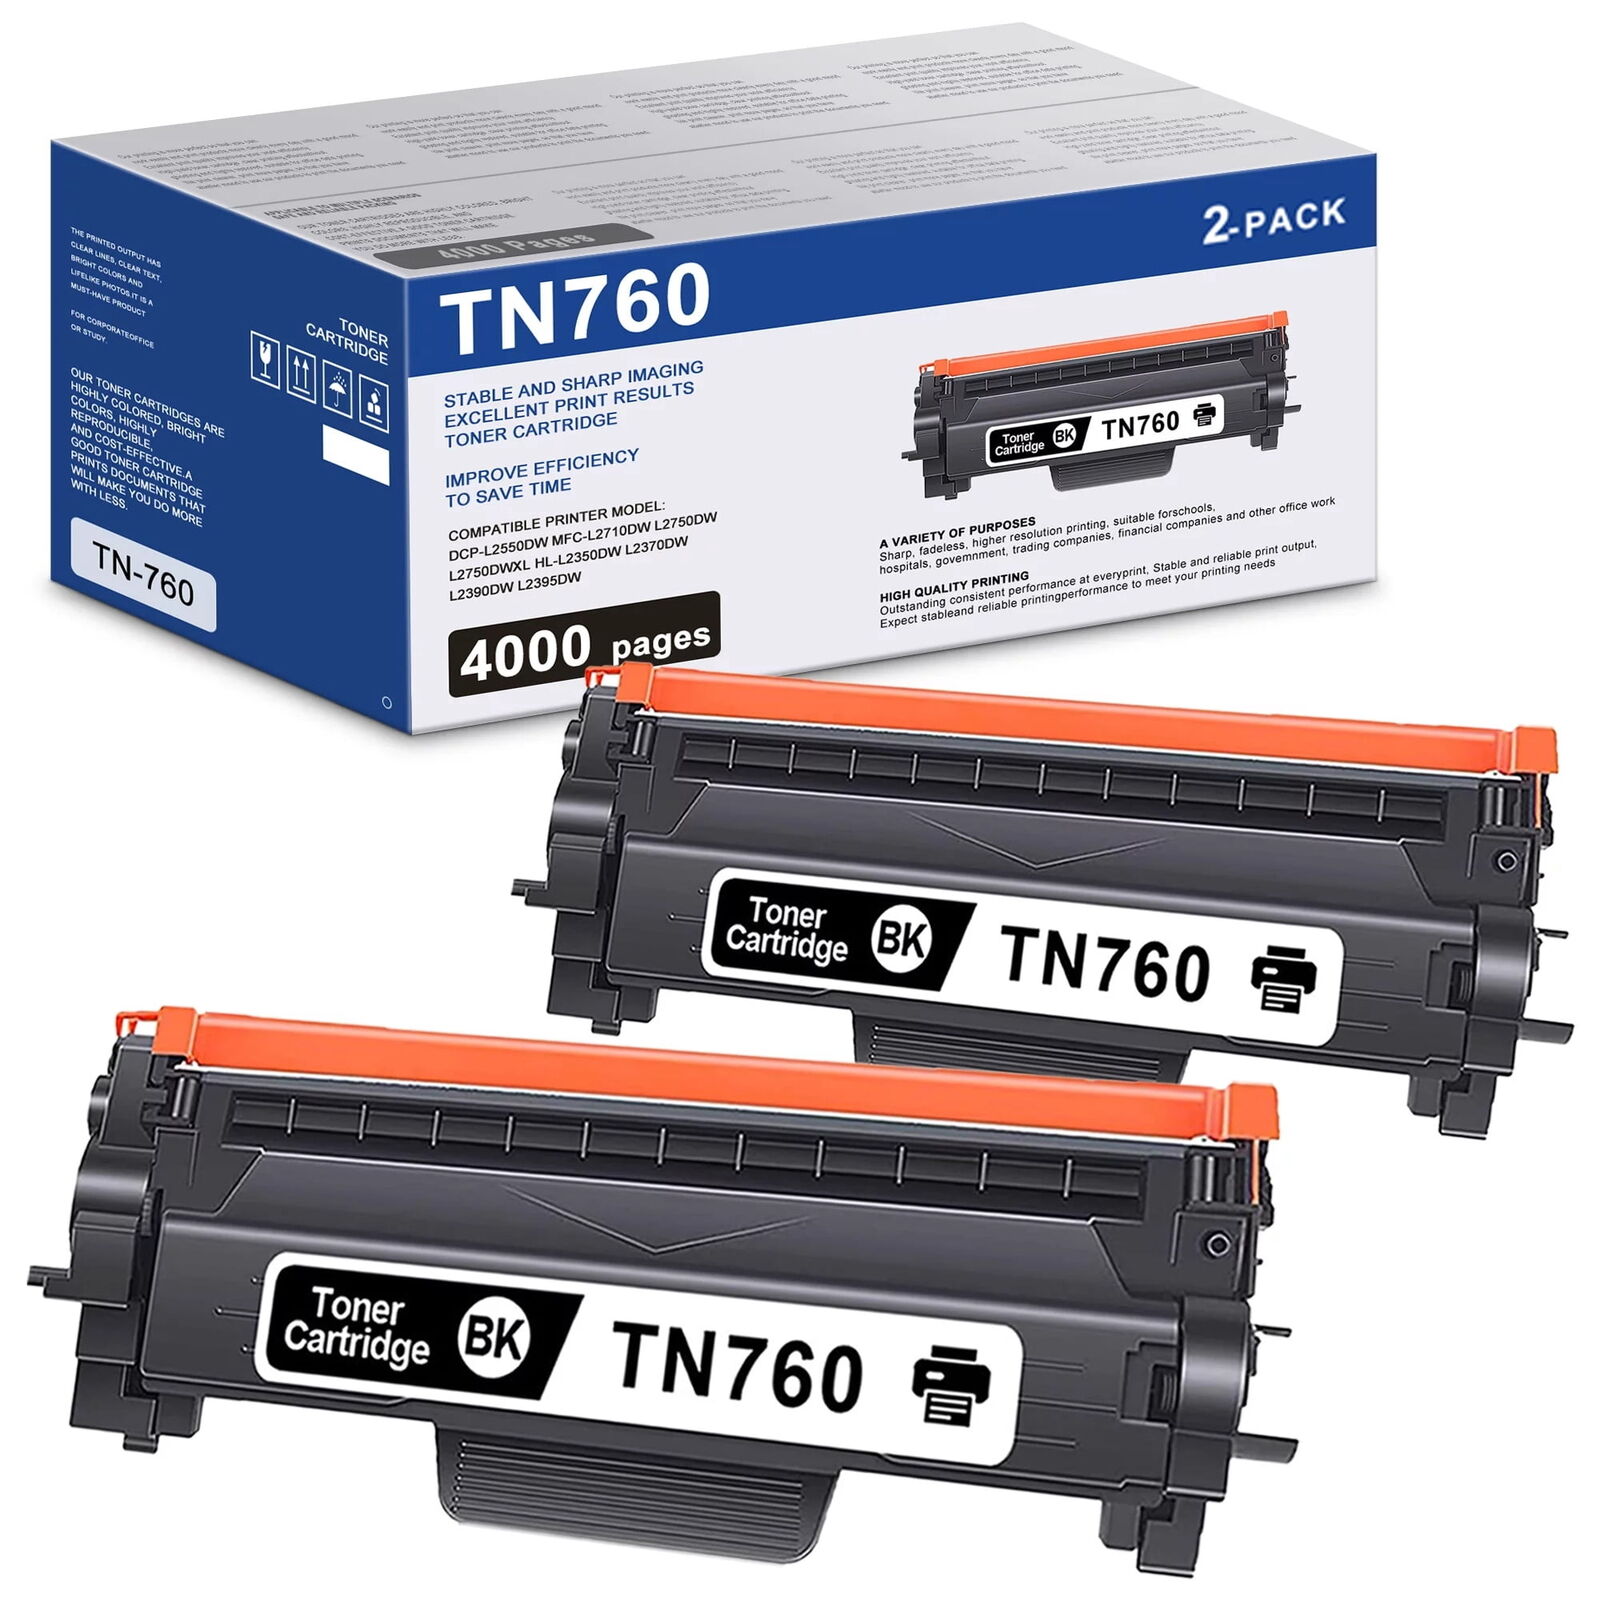 TN760 Toner Cartridge Replacement for Brother TN760 MFC-L2710DW Printer 2Black